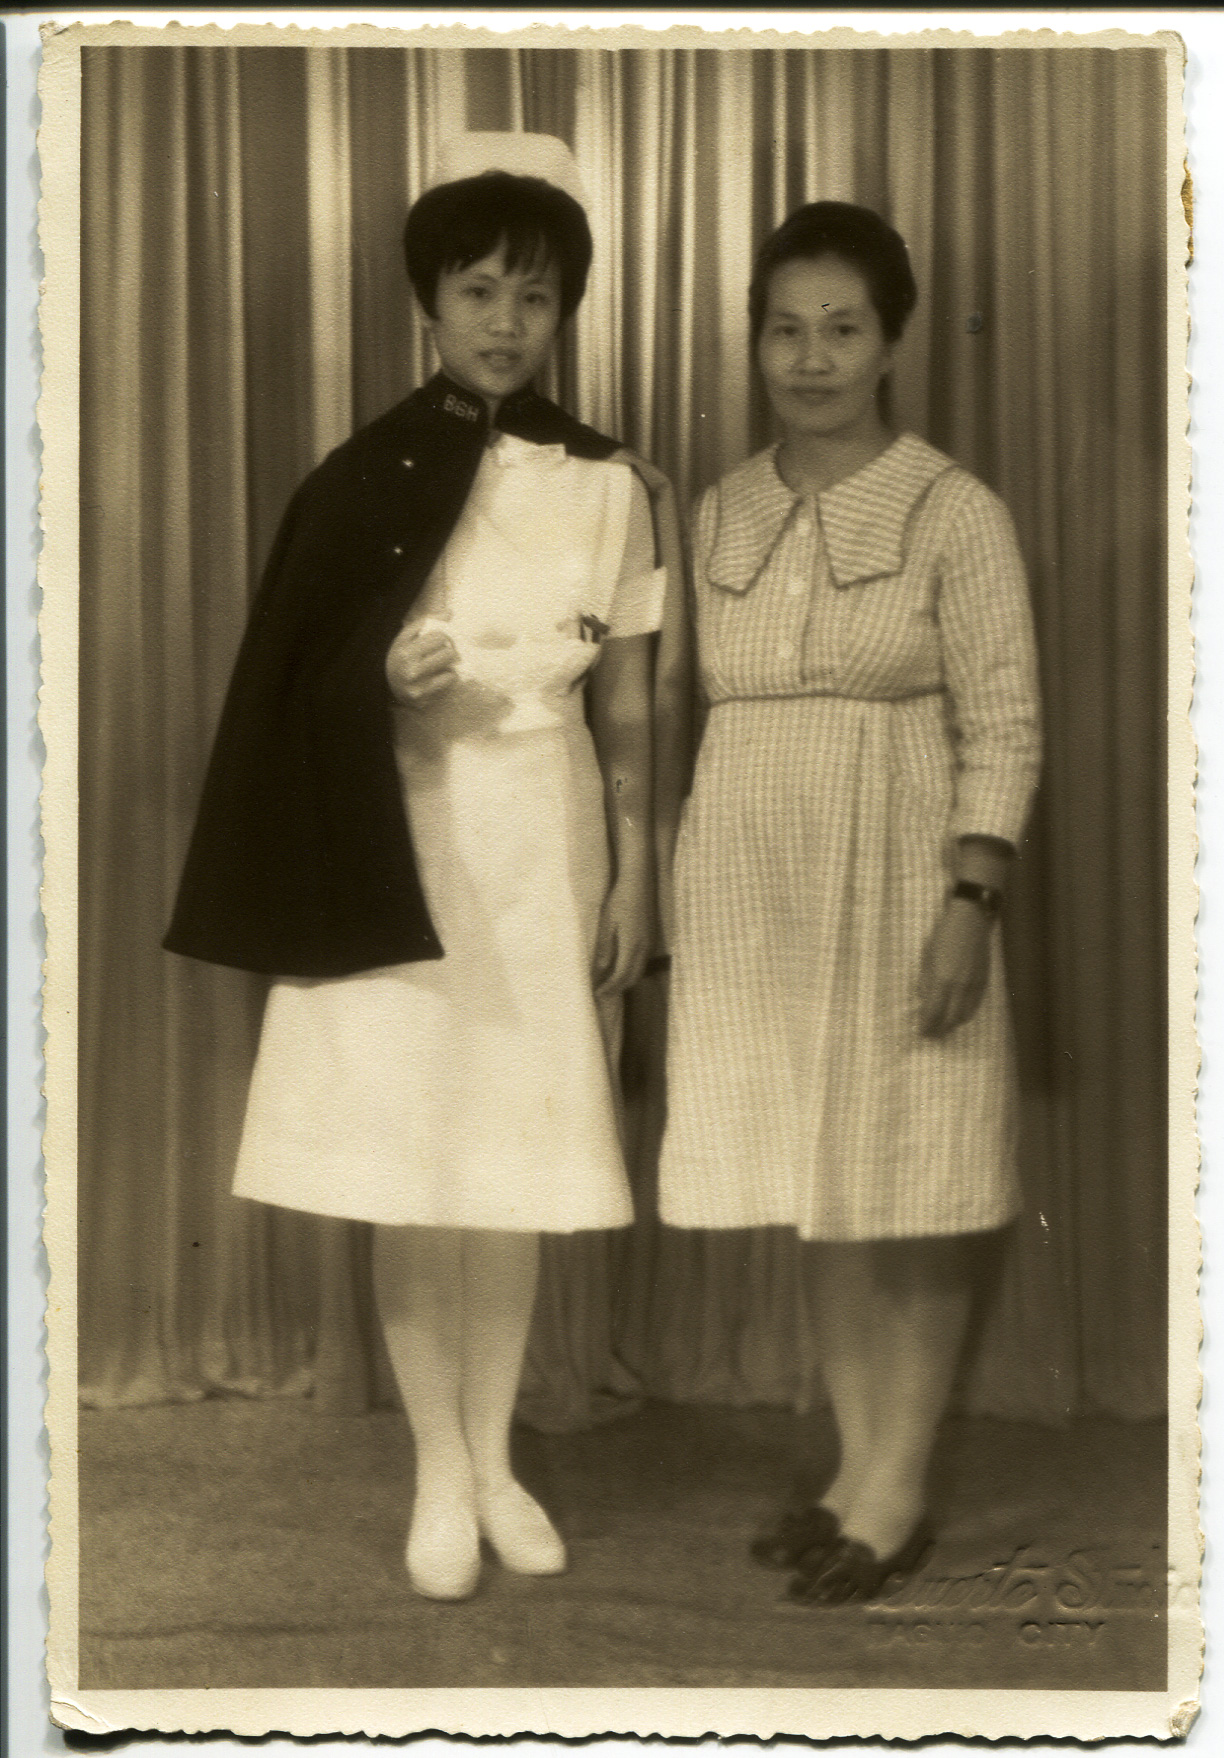 Carol Lamen's mother Melba (left) and grandmother Rosalind (right), taken in Baguio, Philippines. Any views, findings, conclusions, or recommendations expressed in this story do not necessarily represent those of the National Endowment for the Humanities. (c) Field Museum of Natural History - CC BY-NC 4.0